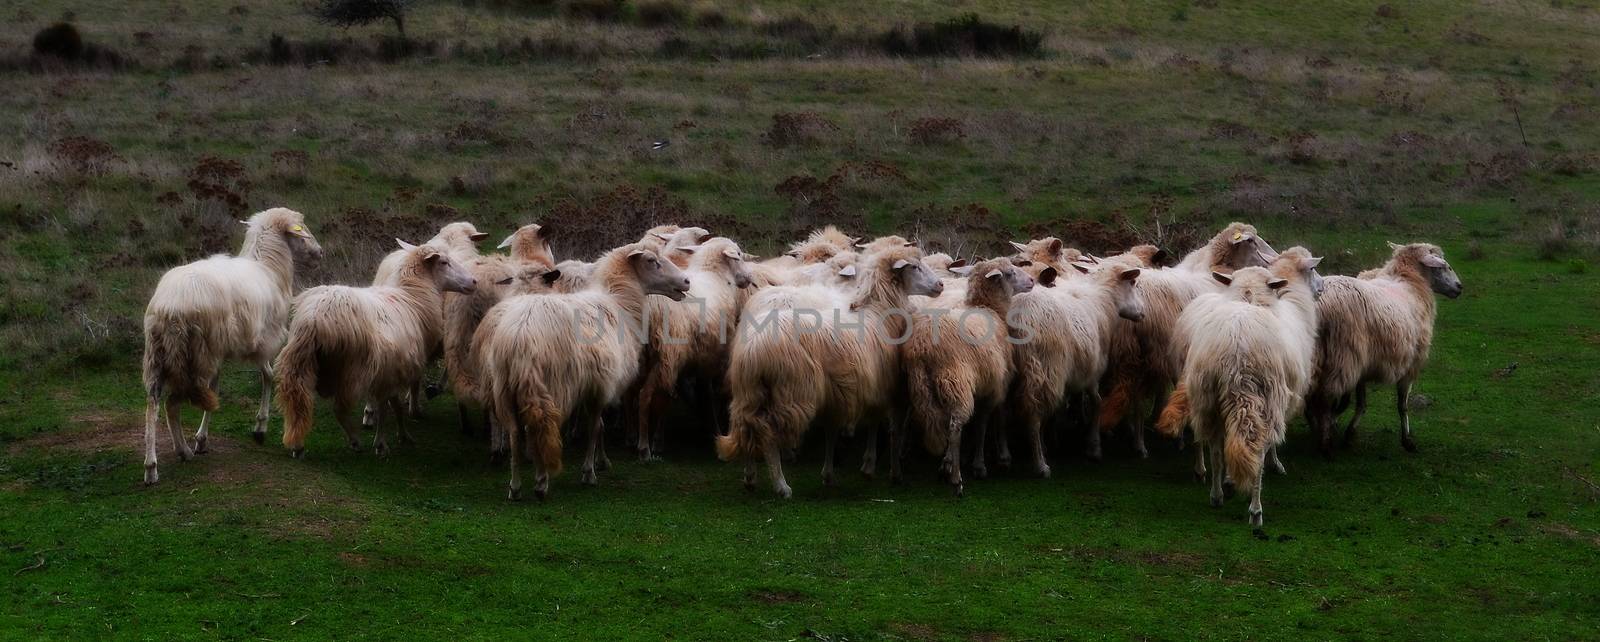 Flock of sheep from rear by Mag6619